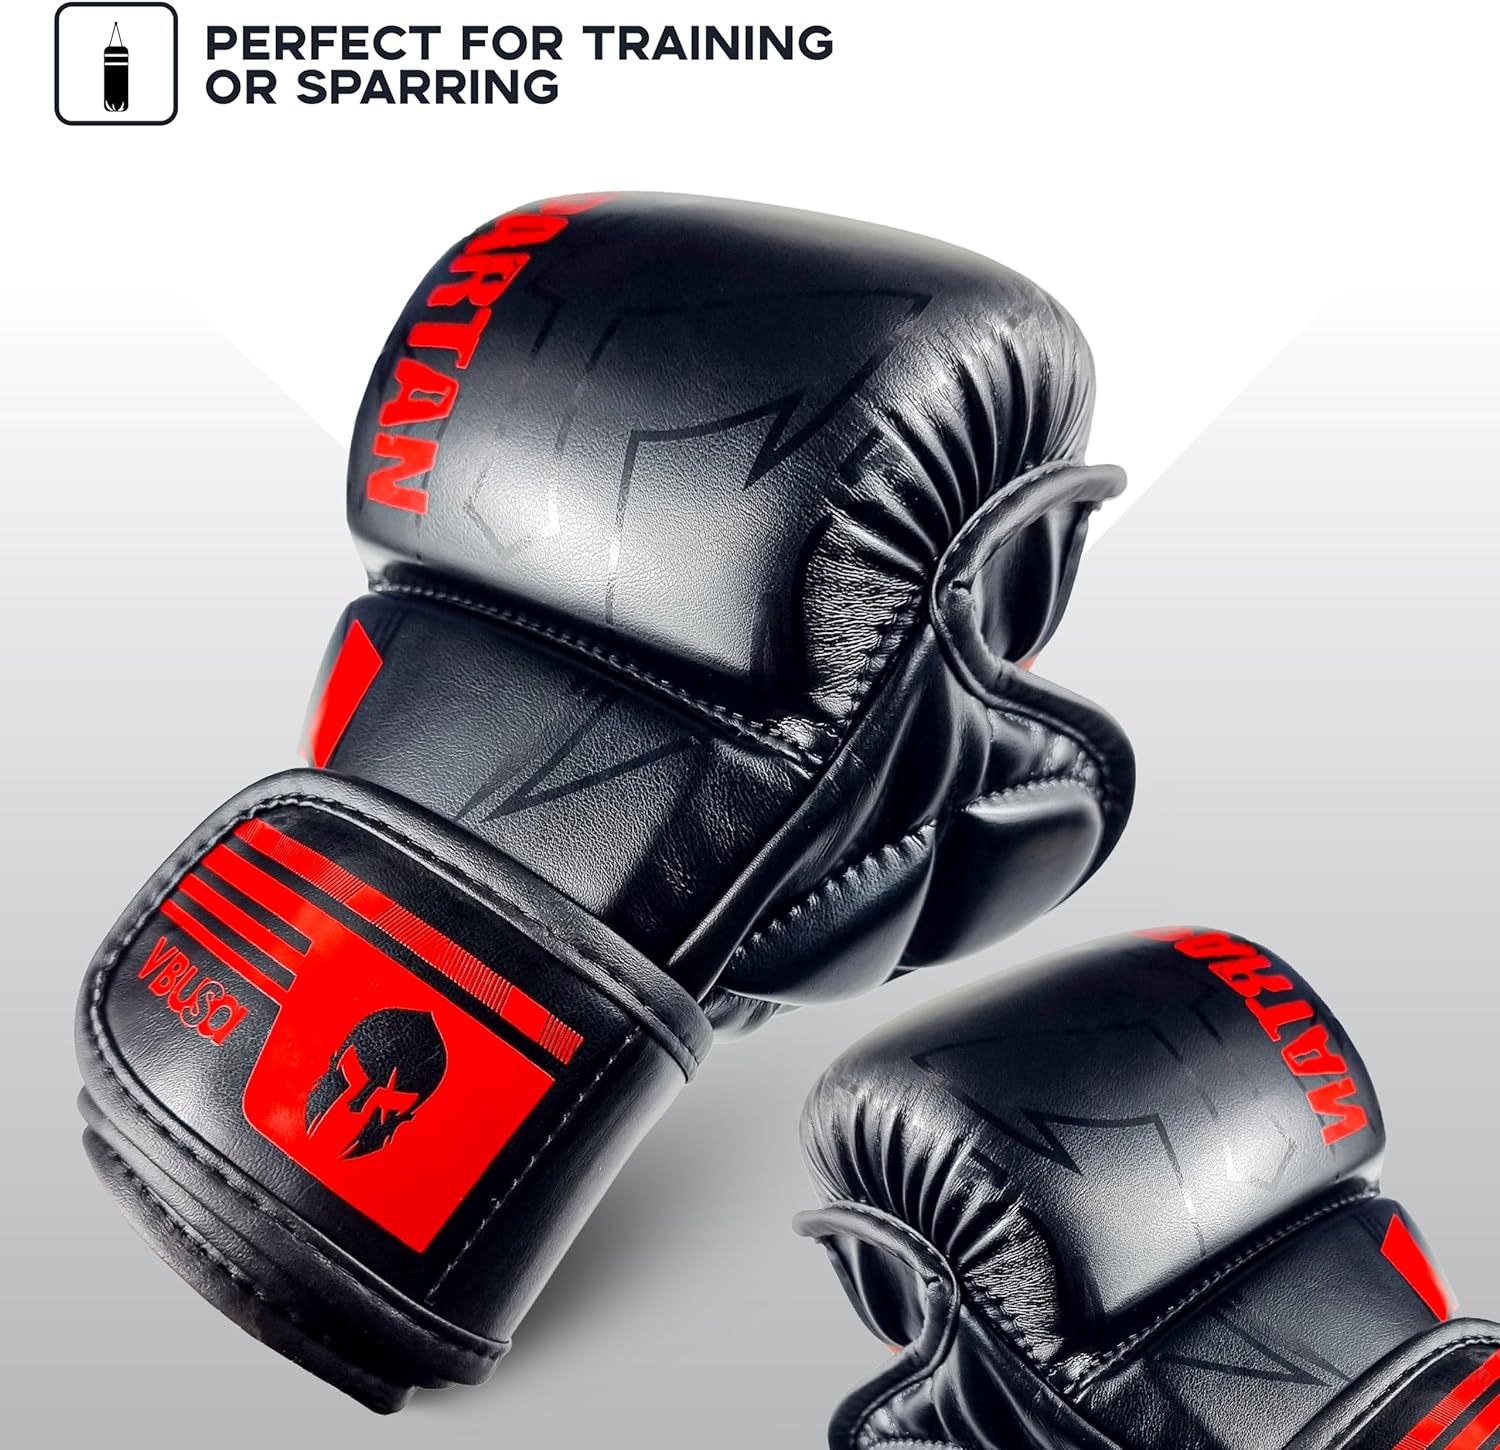 mma-sparring-grappling-gloves-balck-red | mma grappling gloves